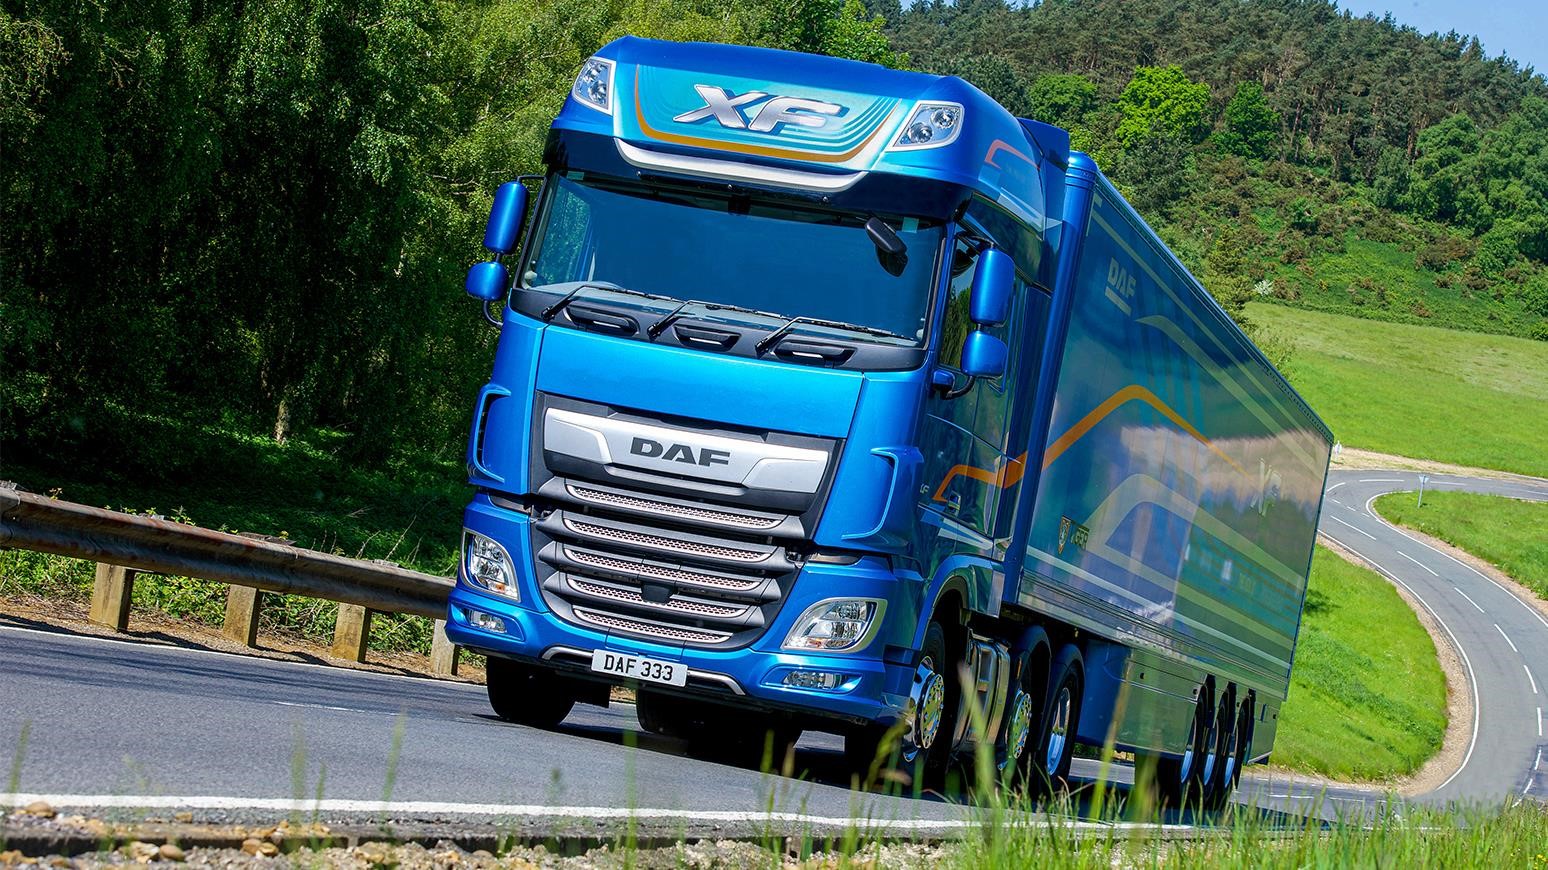 DAF XF Wins Fleet Truck Of The Year At 2020 Motor Transport Awards For Second Consecutive Year